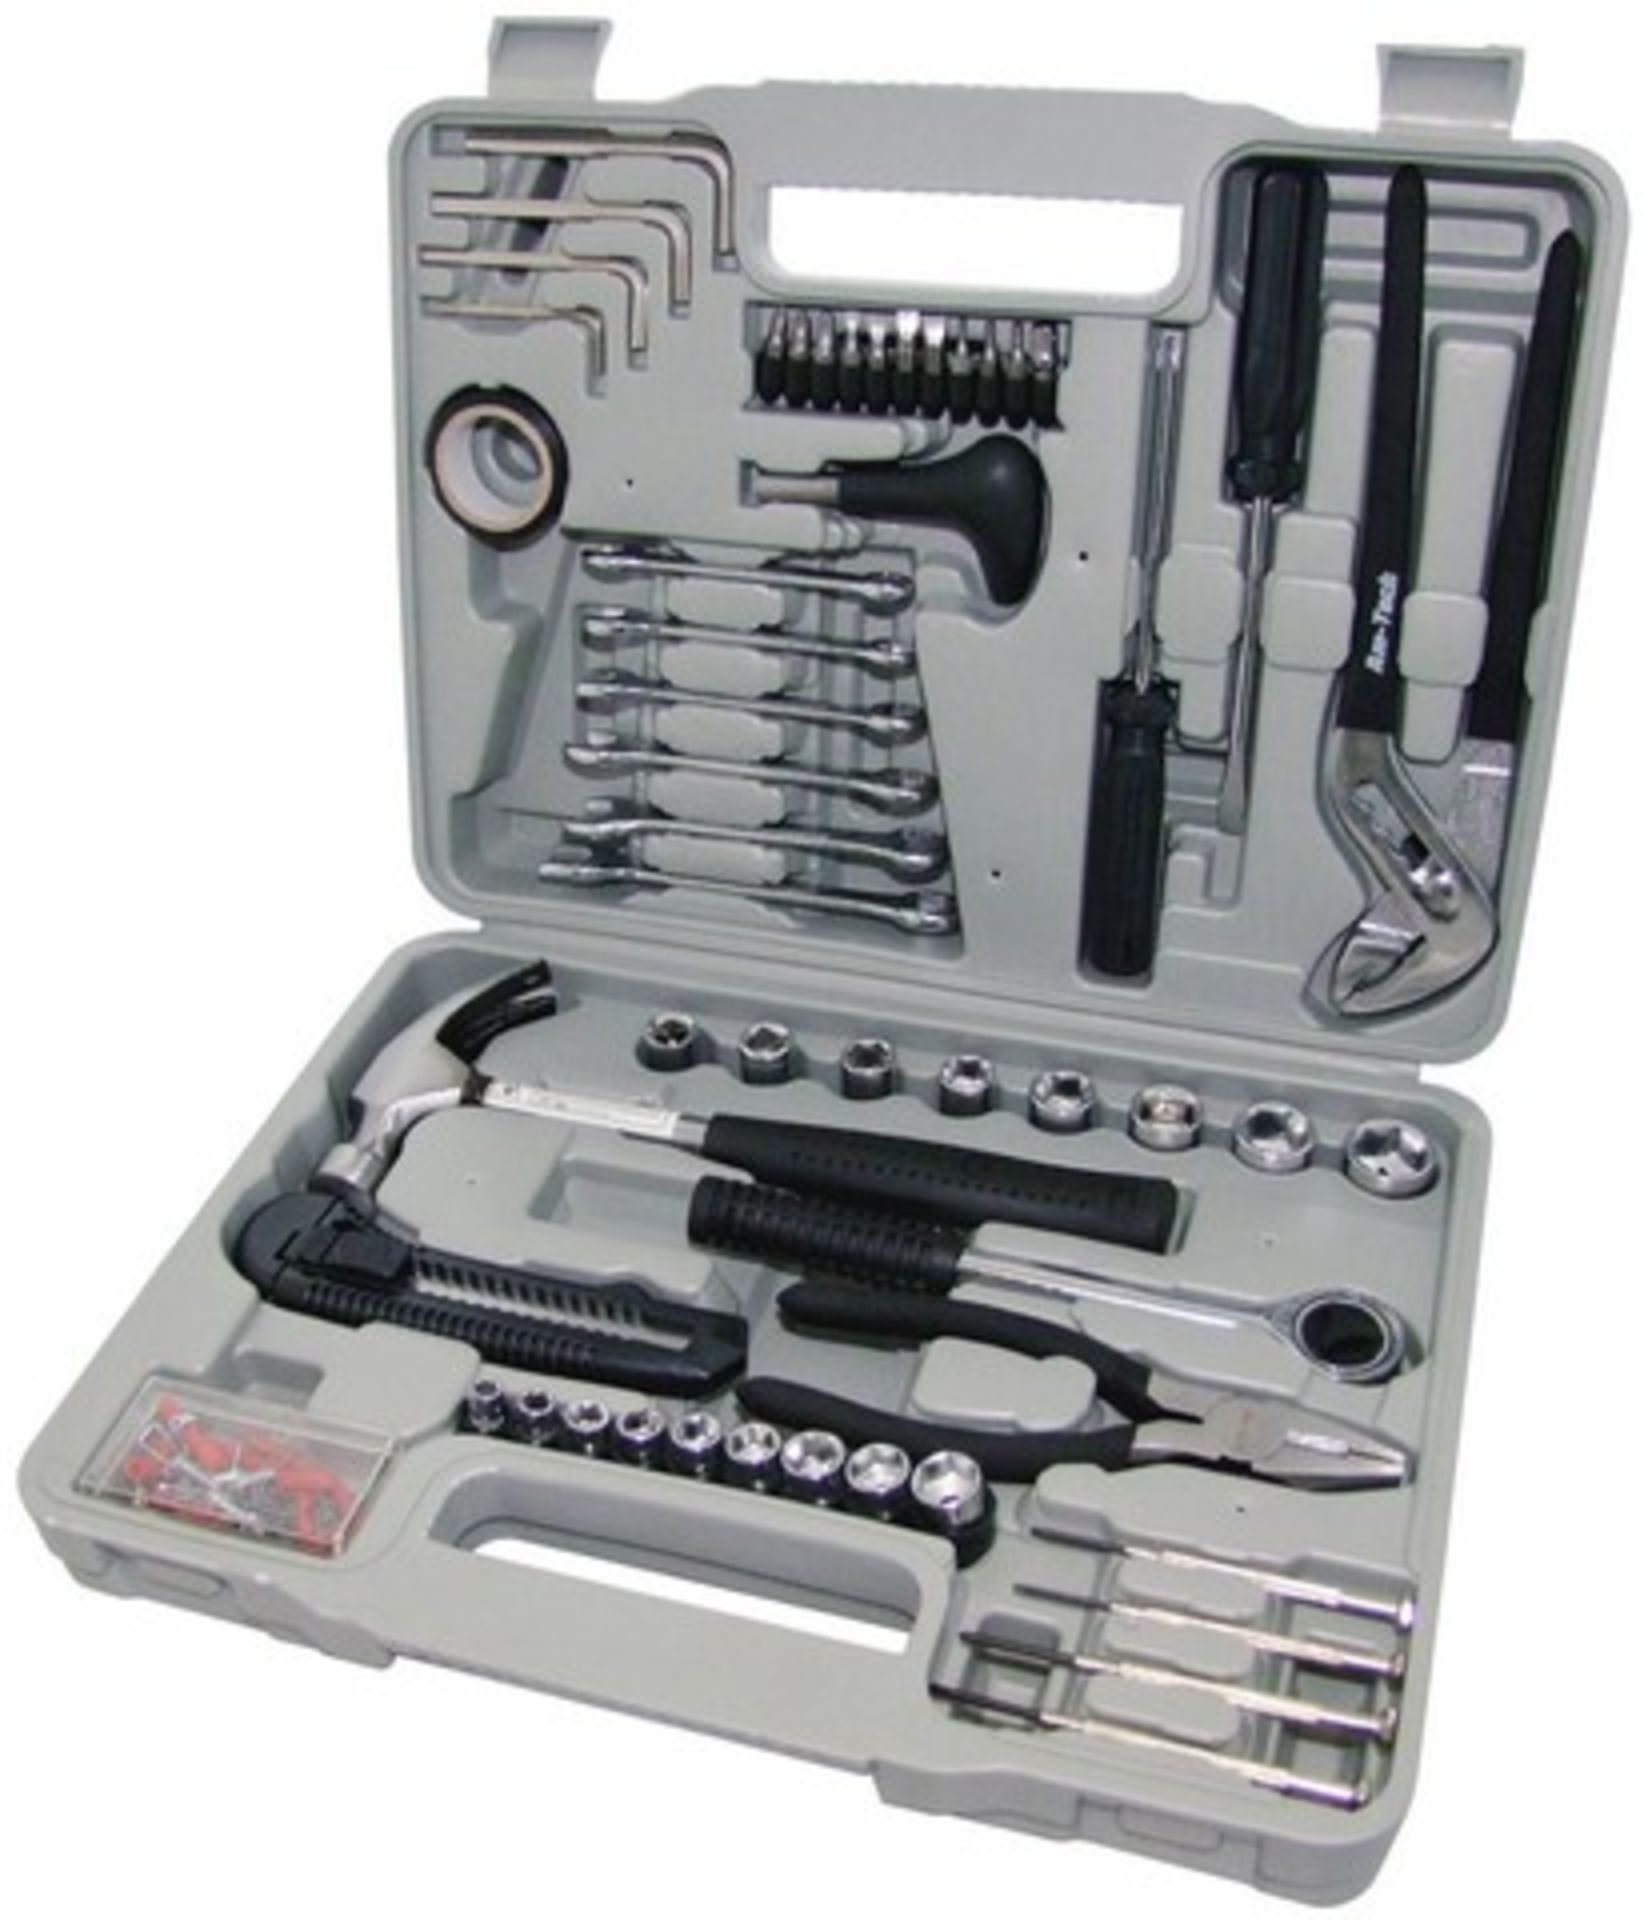 + VAT Brand New 141 piece Tool Kit Includes Screwdivers, Sockets Hex Keys, Wrenches, Screwdriver